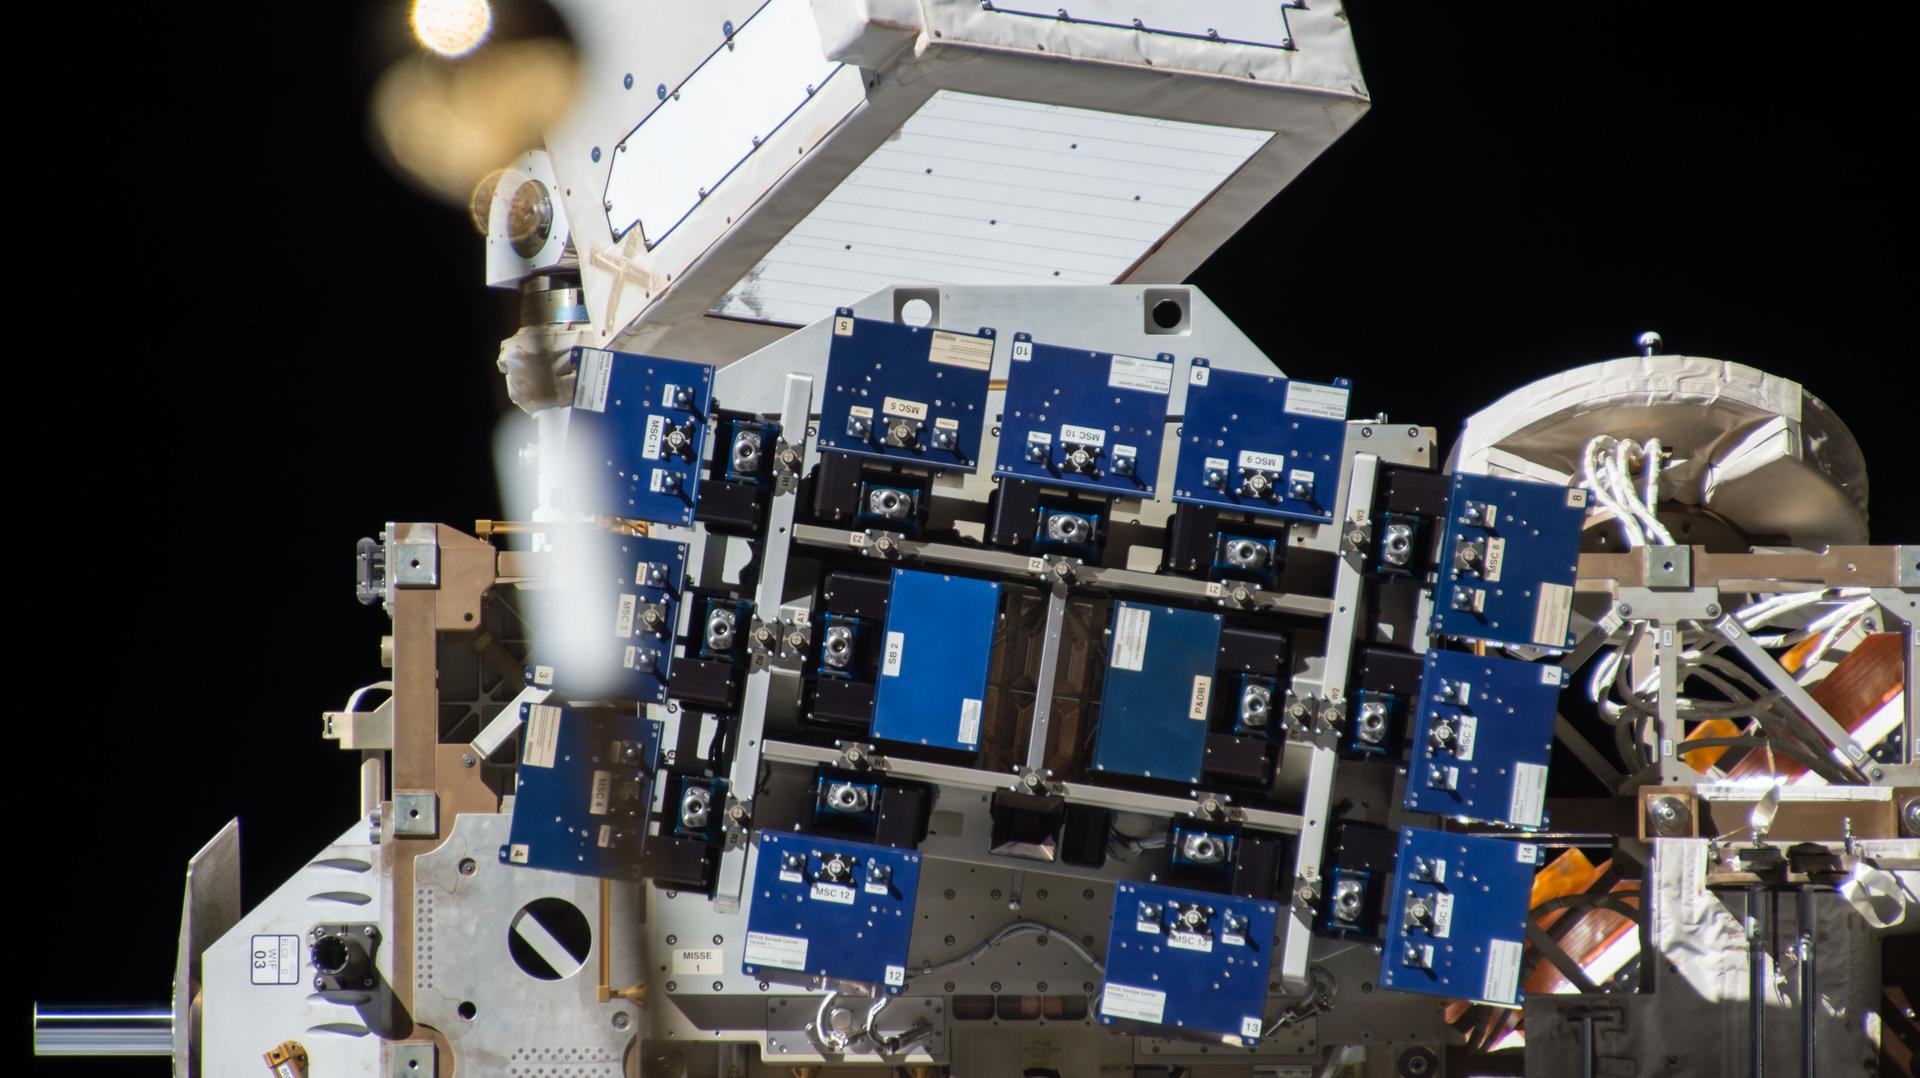 The MISSE-FF is visible in the image center, blue and black panels on a large white structure. The station's robotic arm extends from the top of the image and solar panels fill the background with the blackness of space behind them.